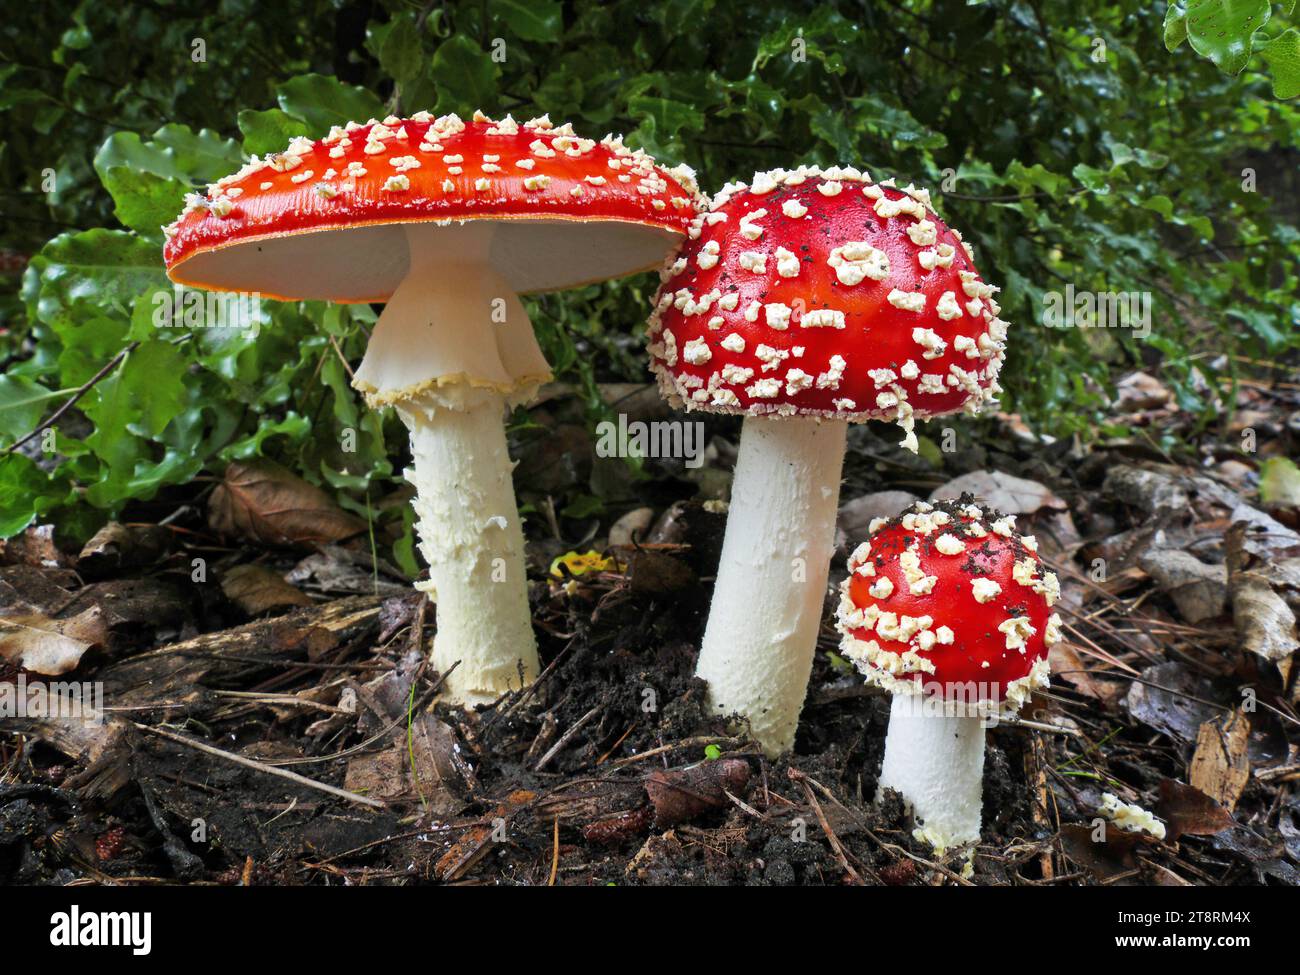 Fly Agric. (Amanita muscaria), The fly agaric is an attractive, vibrantly coloured toadstool, which is familiar and instantly recognisable . It has a bright red cap, which fades to an orange or orange-yellowish colour with age. The fluffy white spots on the cap often take on a yellowish tinge as they grow old, and may occasionally be washed away by rain The stem has a bulbous base, and tapers towards the cap . This fungus is dangerously poisonous and should NEVER be tasted Stock Photo